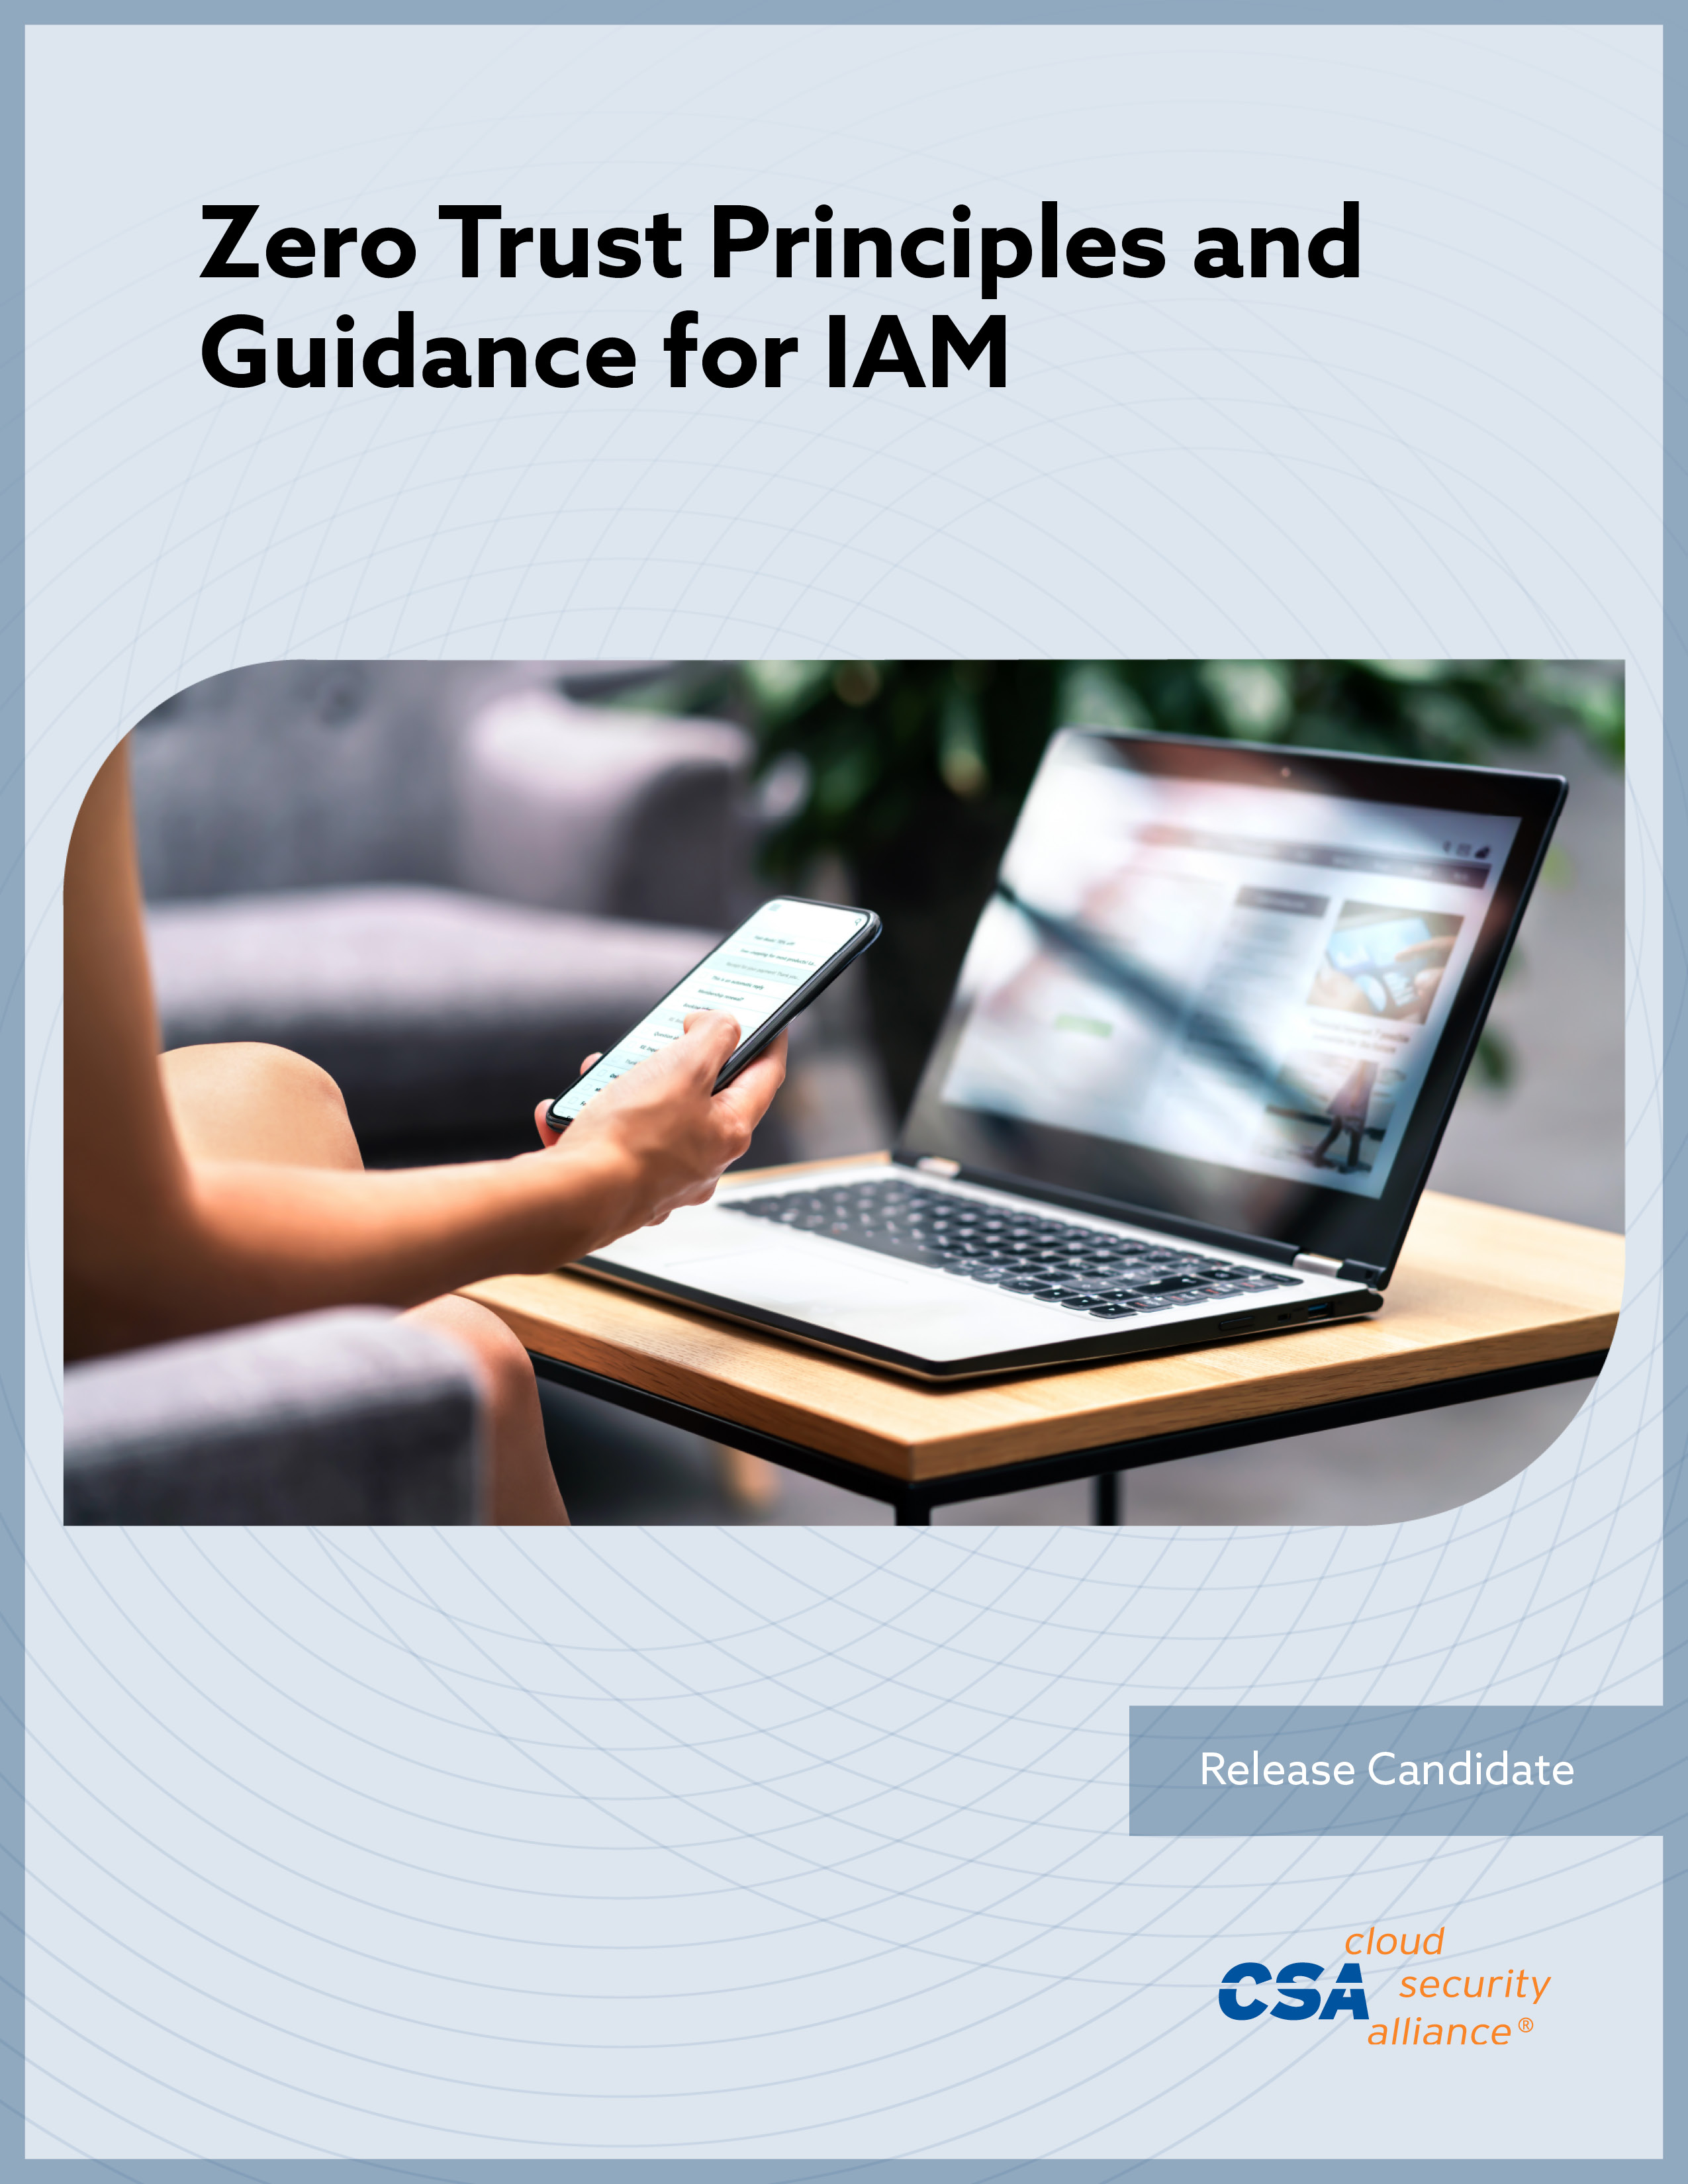 Zero Trust Principles and Guidance for Identity and Access Management (IAM)